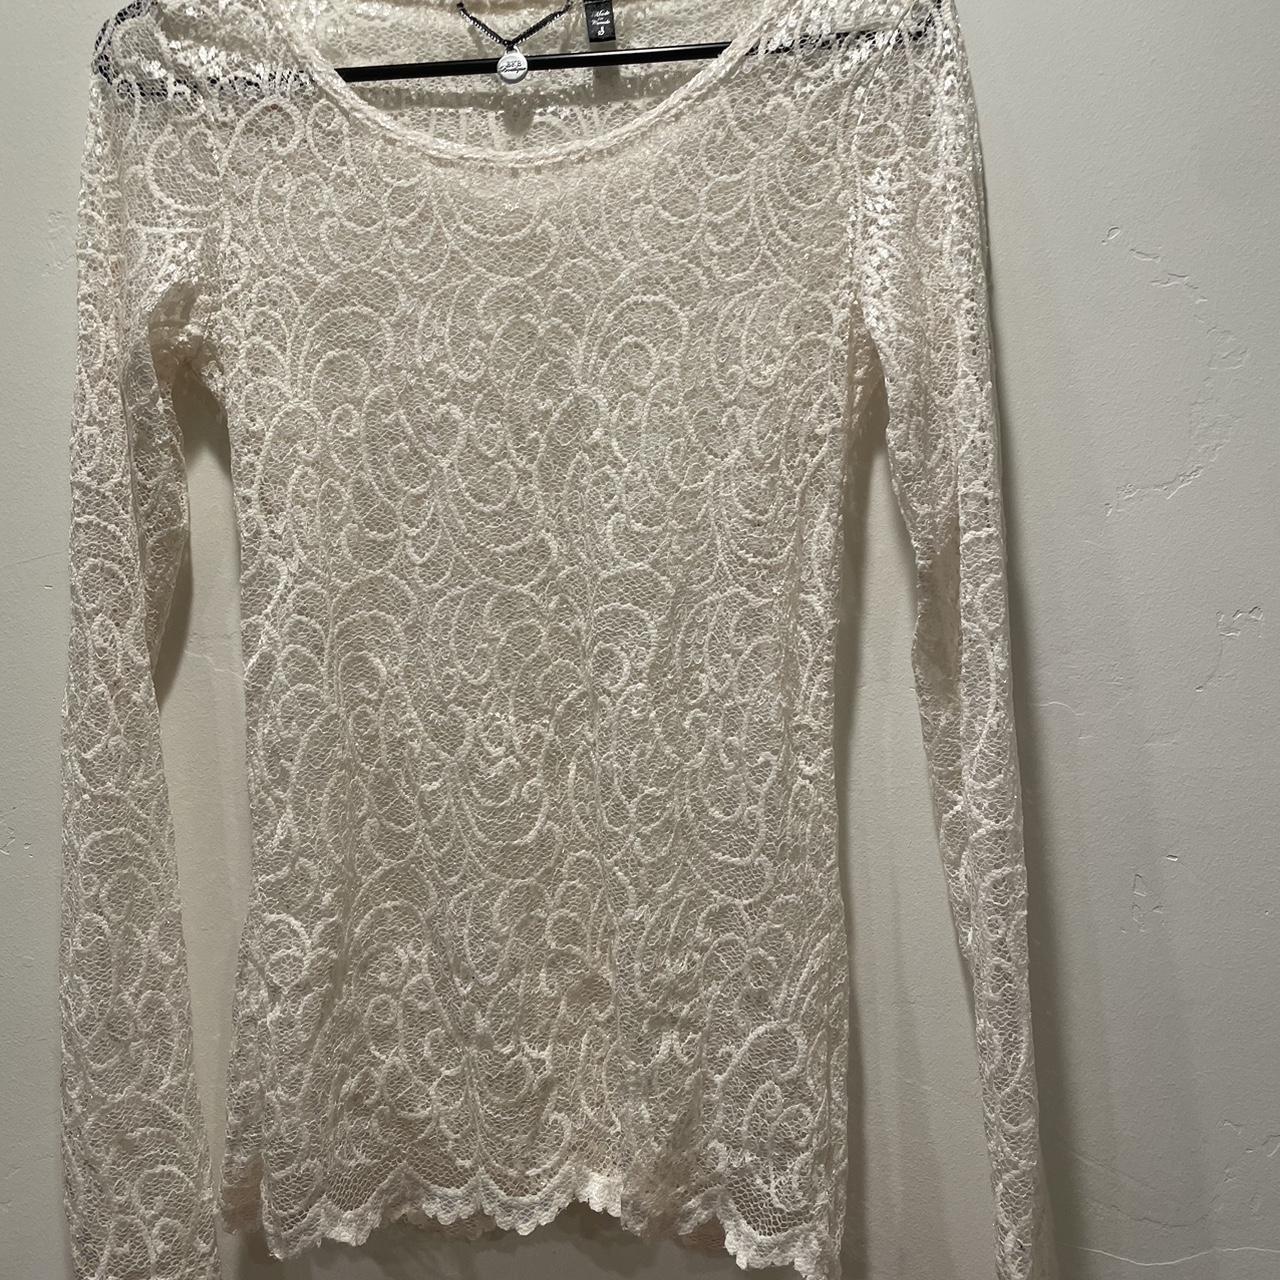 Lace see through top GORGEOUS lace. Pretty cream - Depop